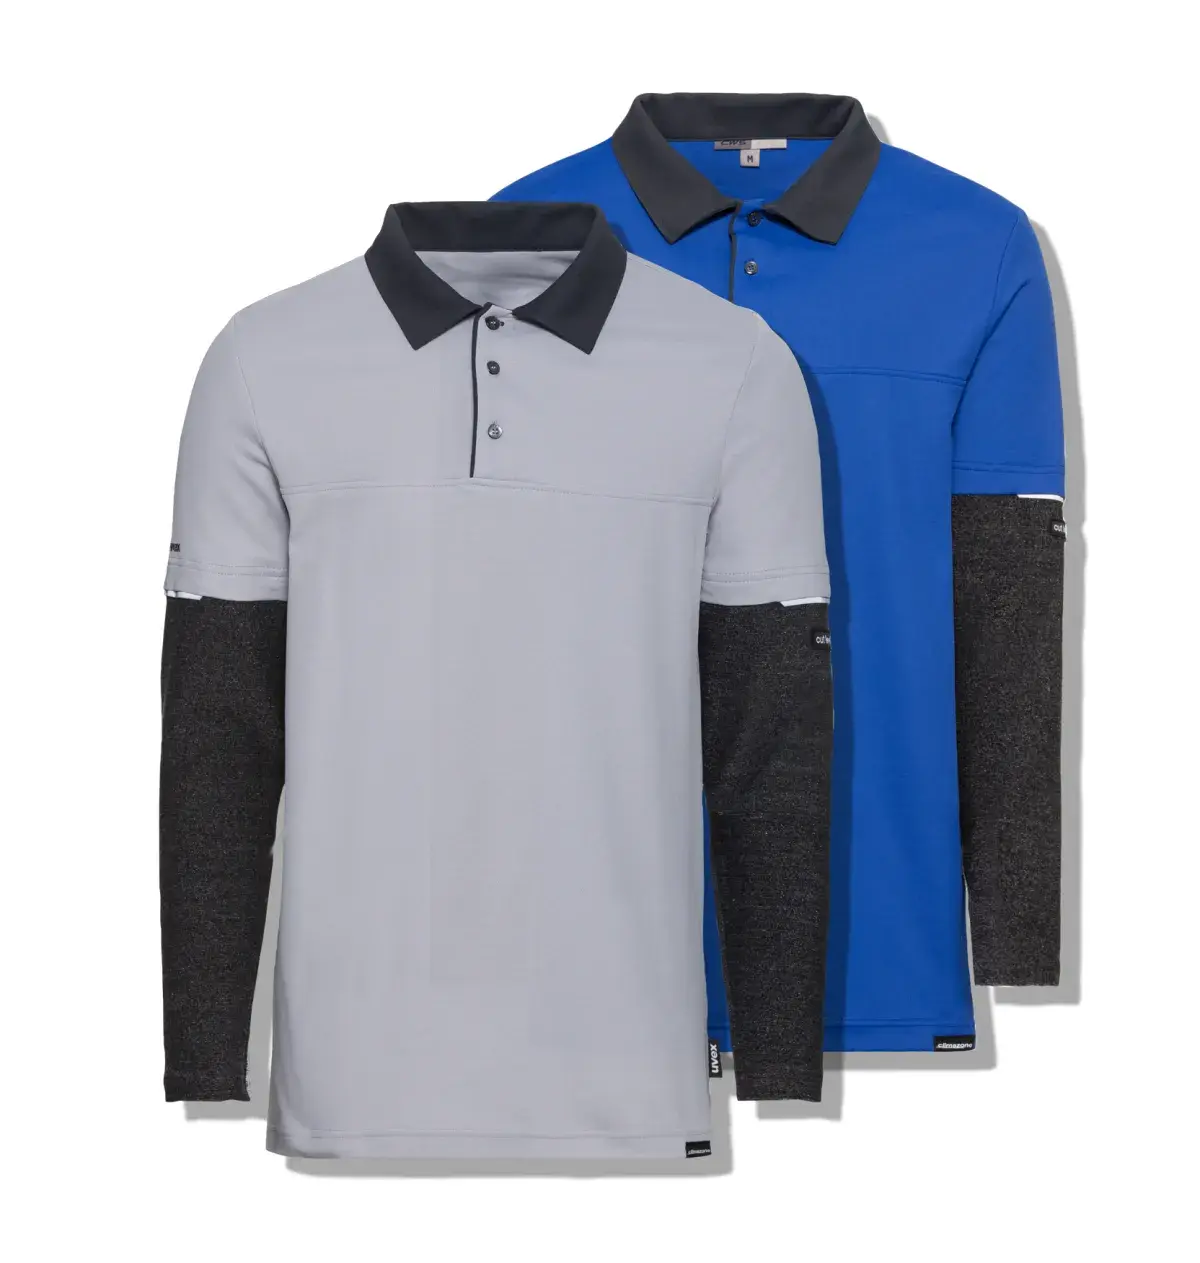 CWS Cut Protection Polos w/ Bamboo TwinFlex Technology